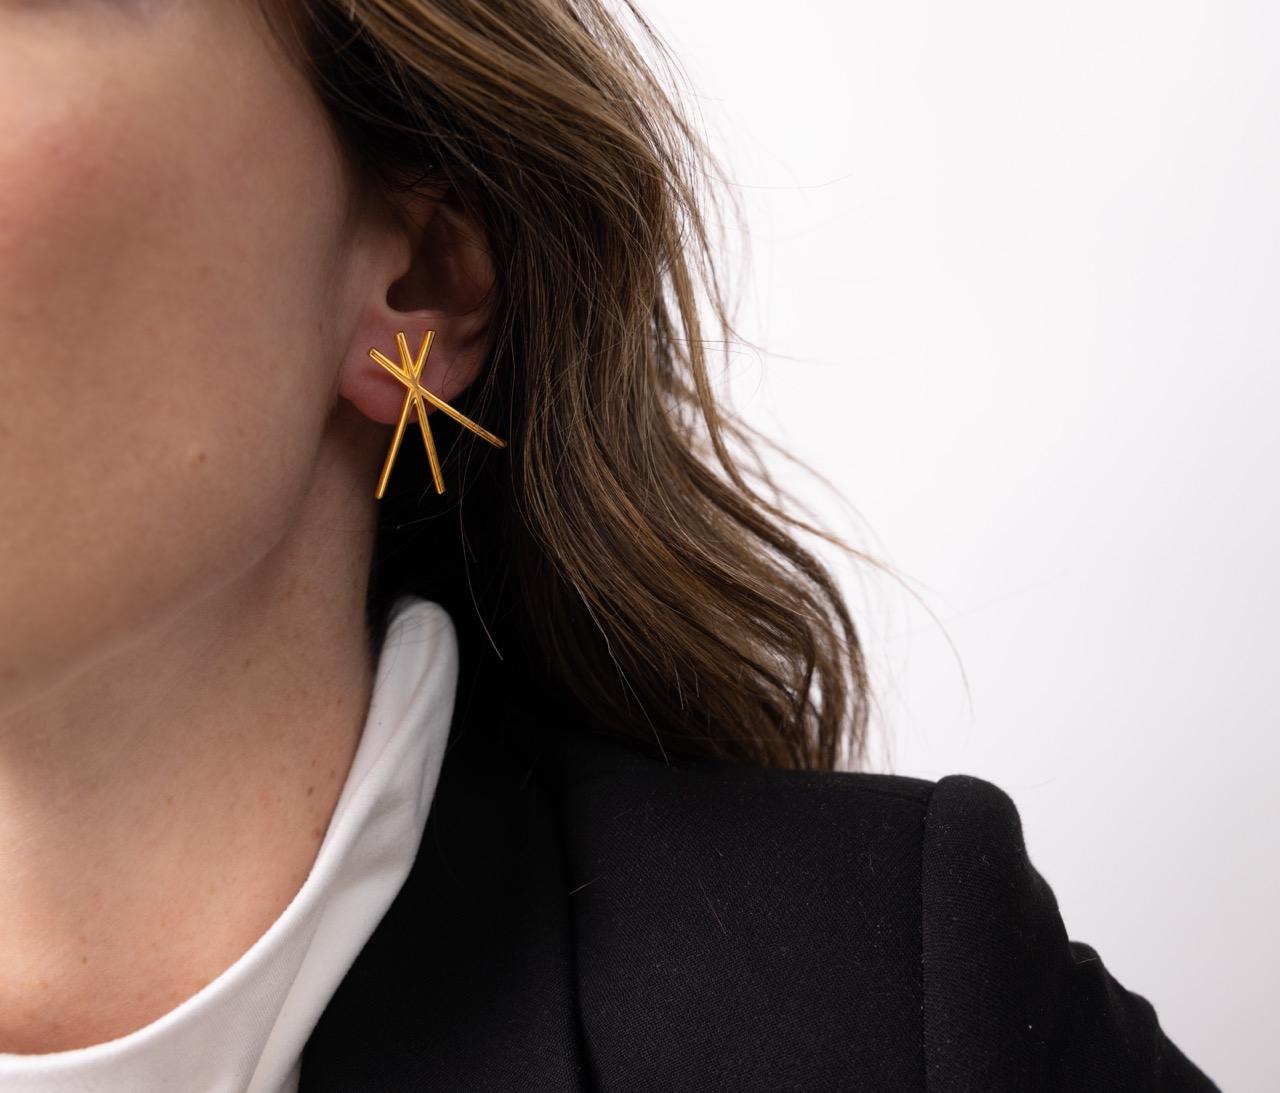 Created in the aftermath of my trip to an open-air ethnographic museum created by Dimitrie Gusti in Bucharest, Romania, these earrings are inspired by the shape of traditional windmills. Windmill holds a lot of symbolism, and not only in its image